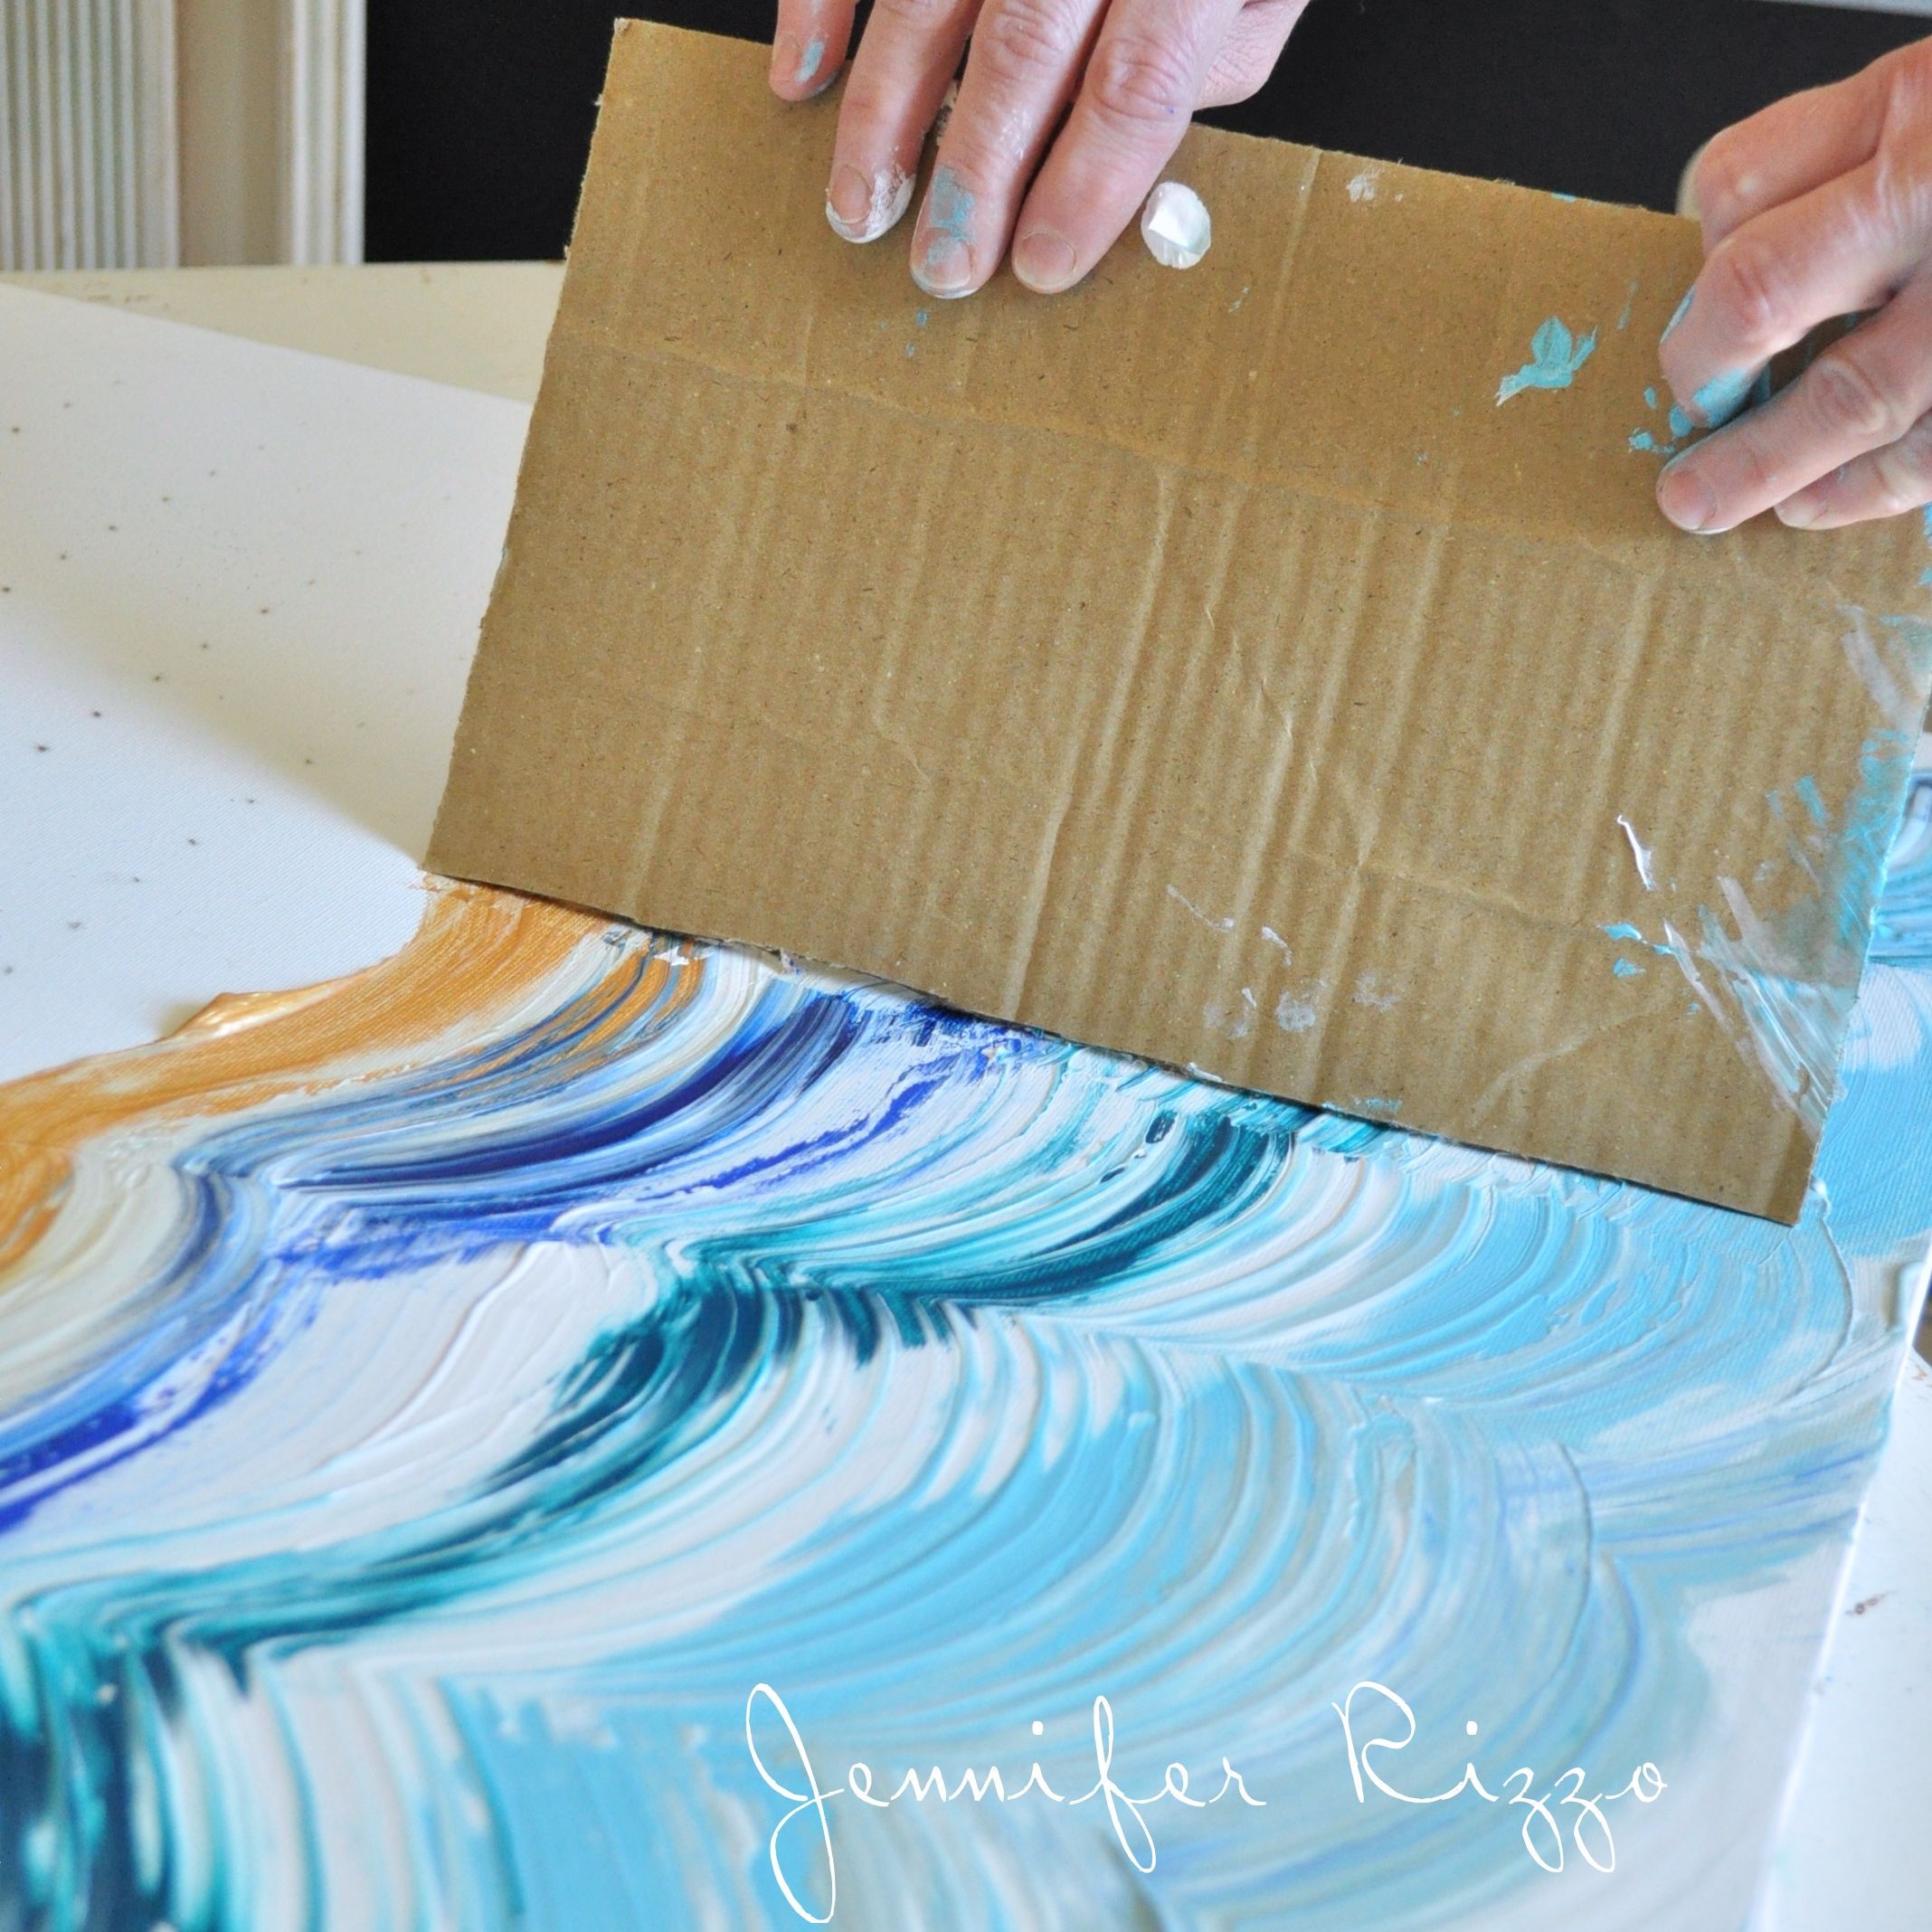 Drag your card board across your paint to make your design- a great way to make a striped or striated patt